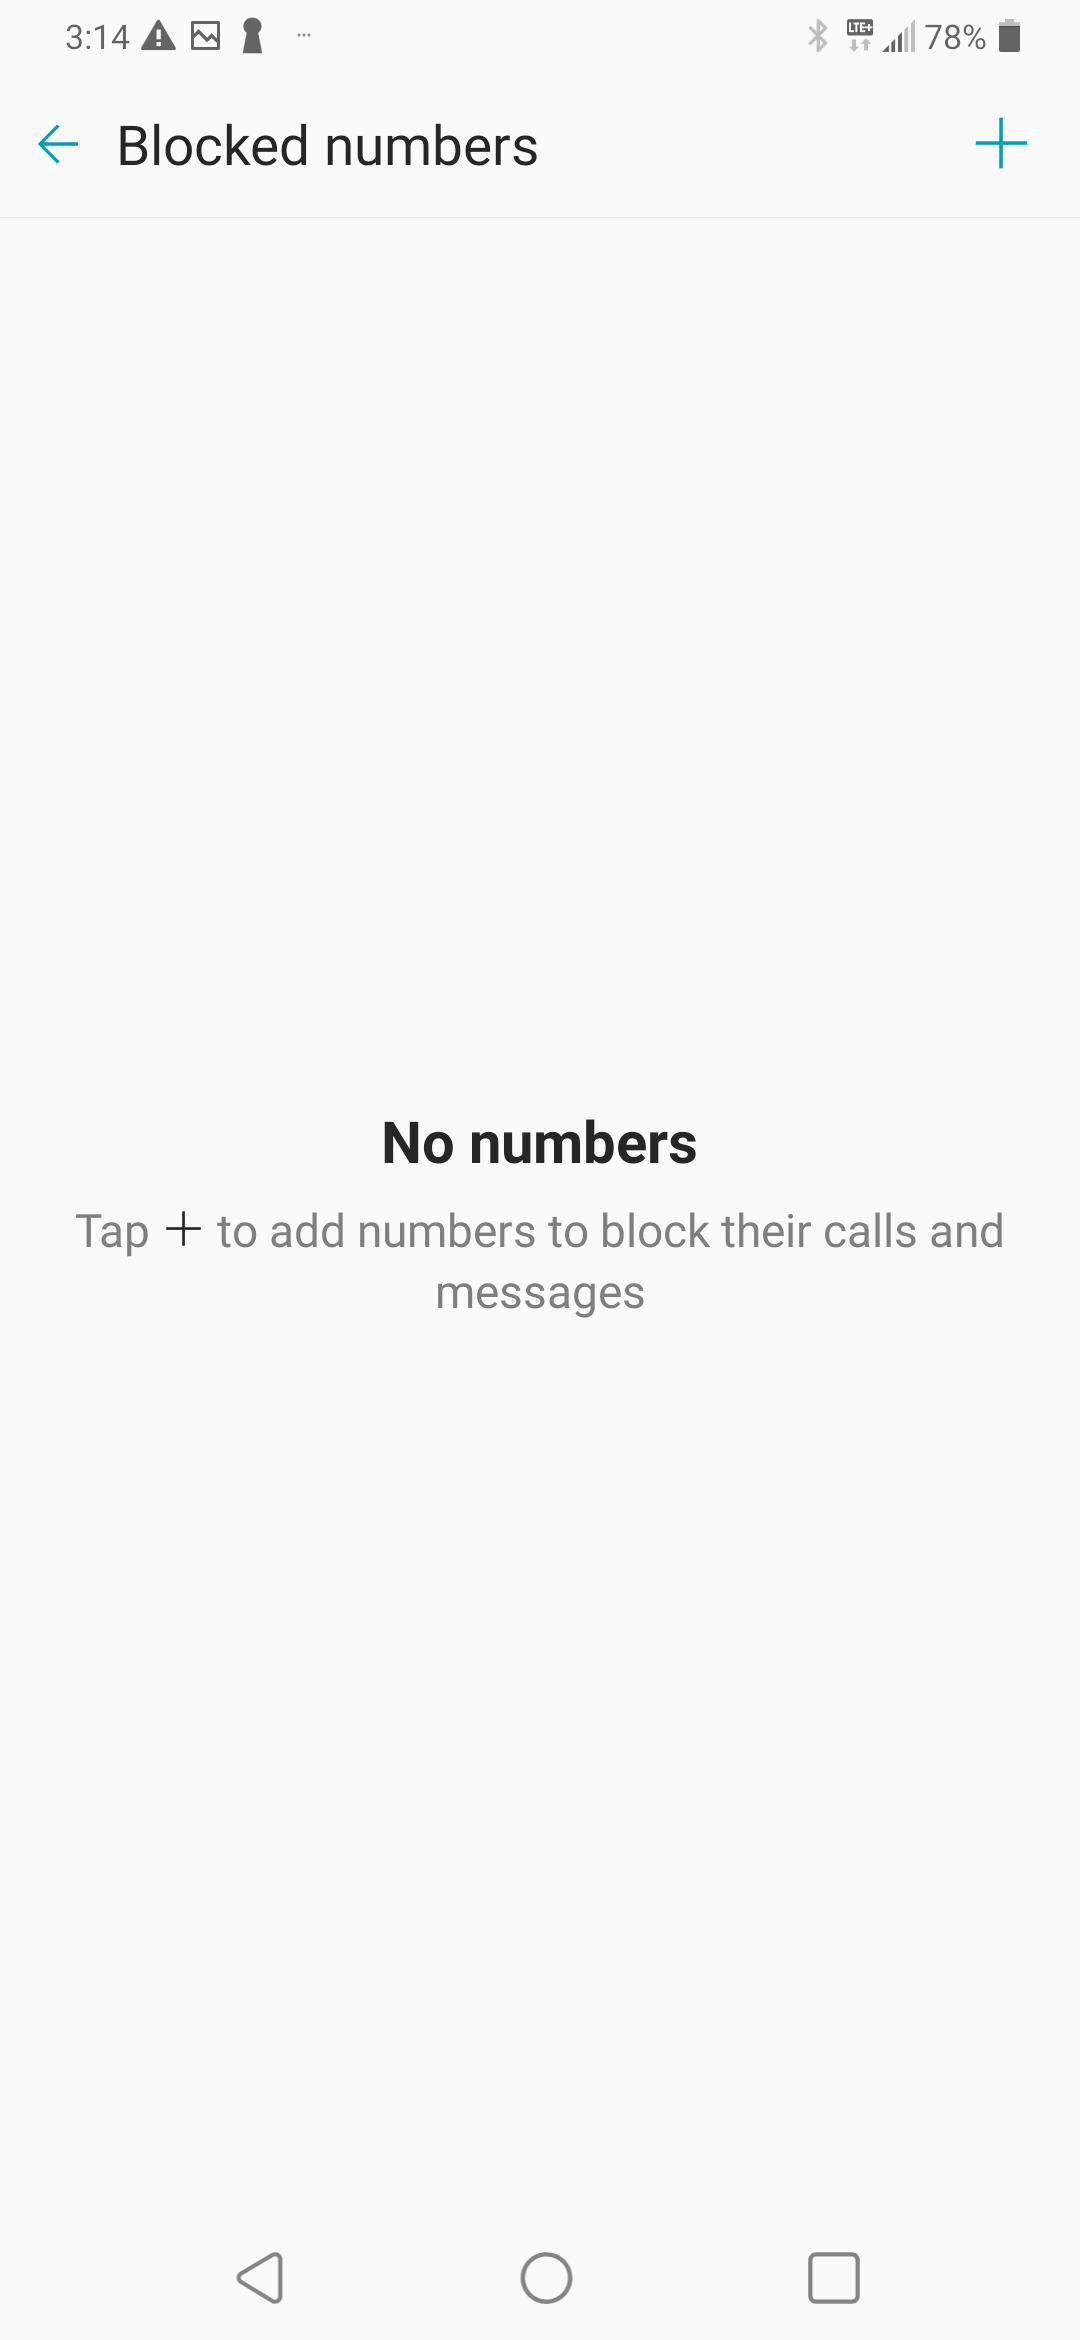 To block a phone number: touch the + icon.